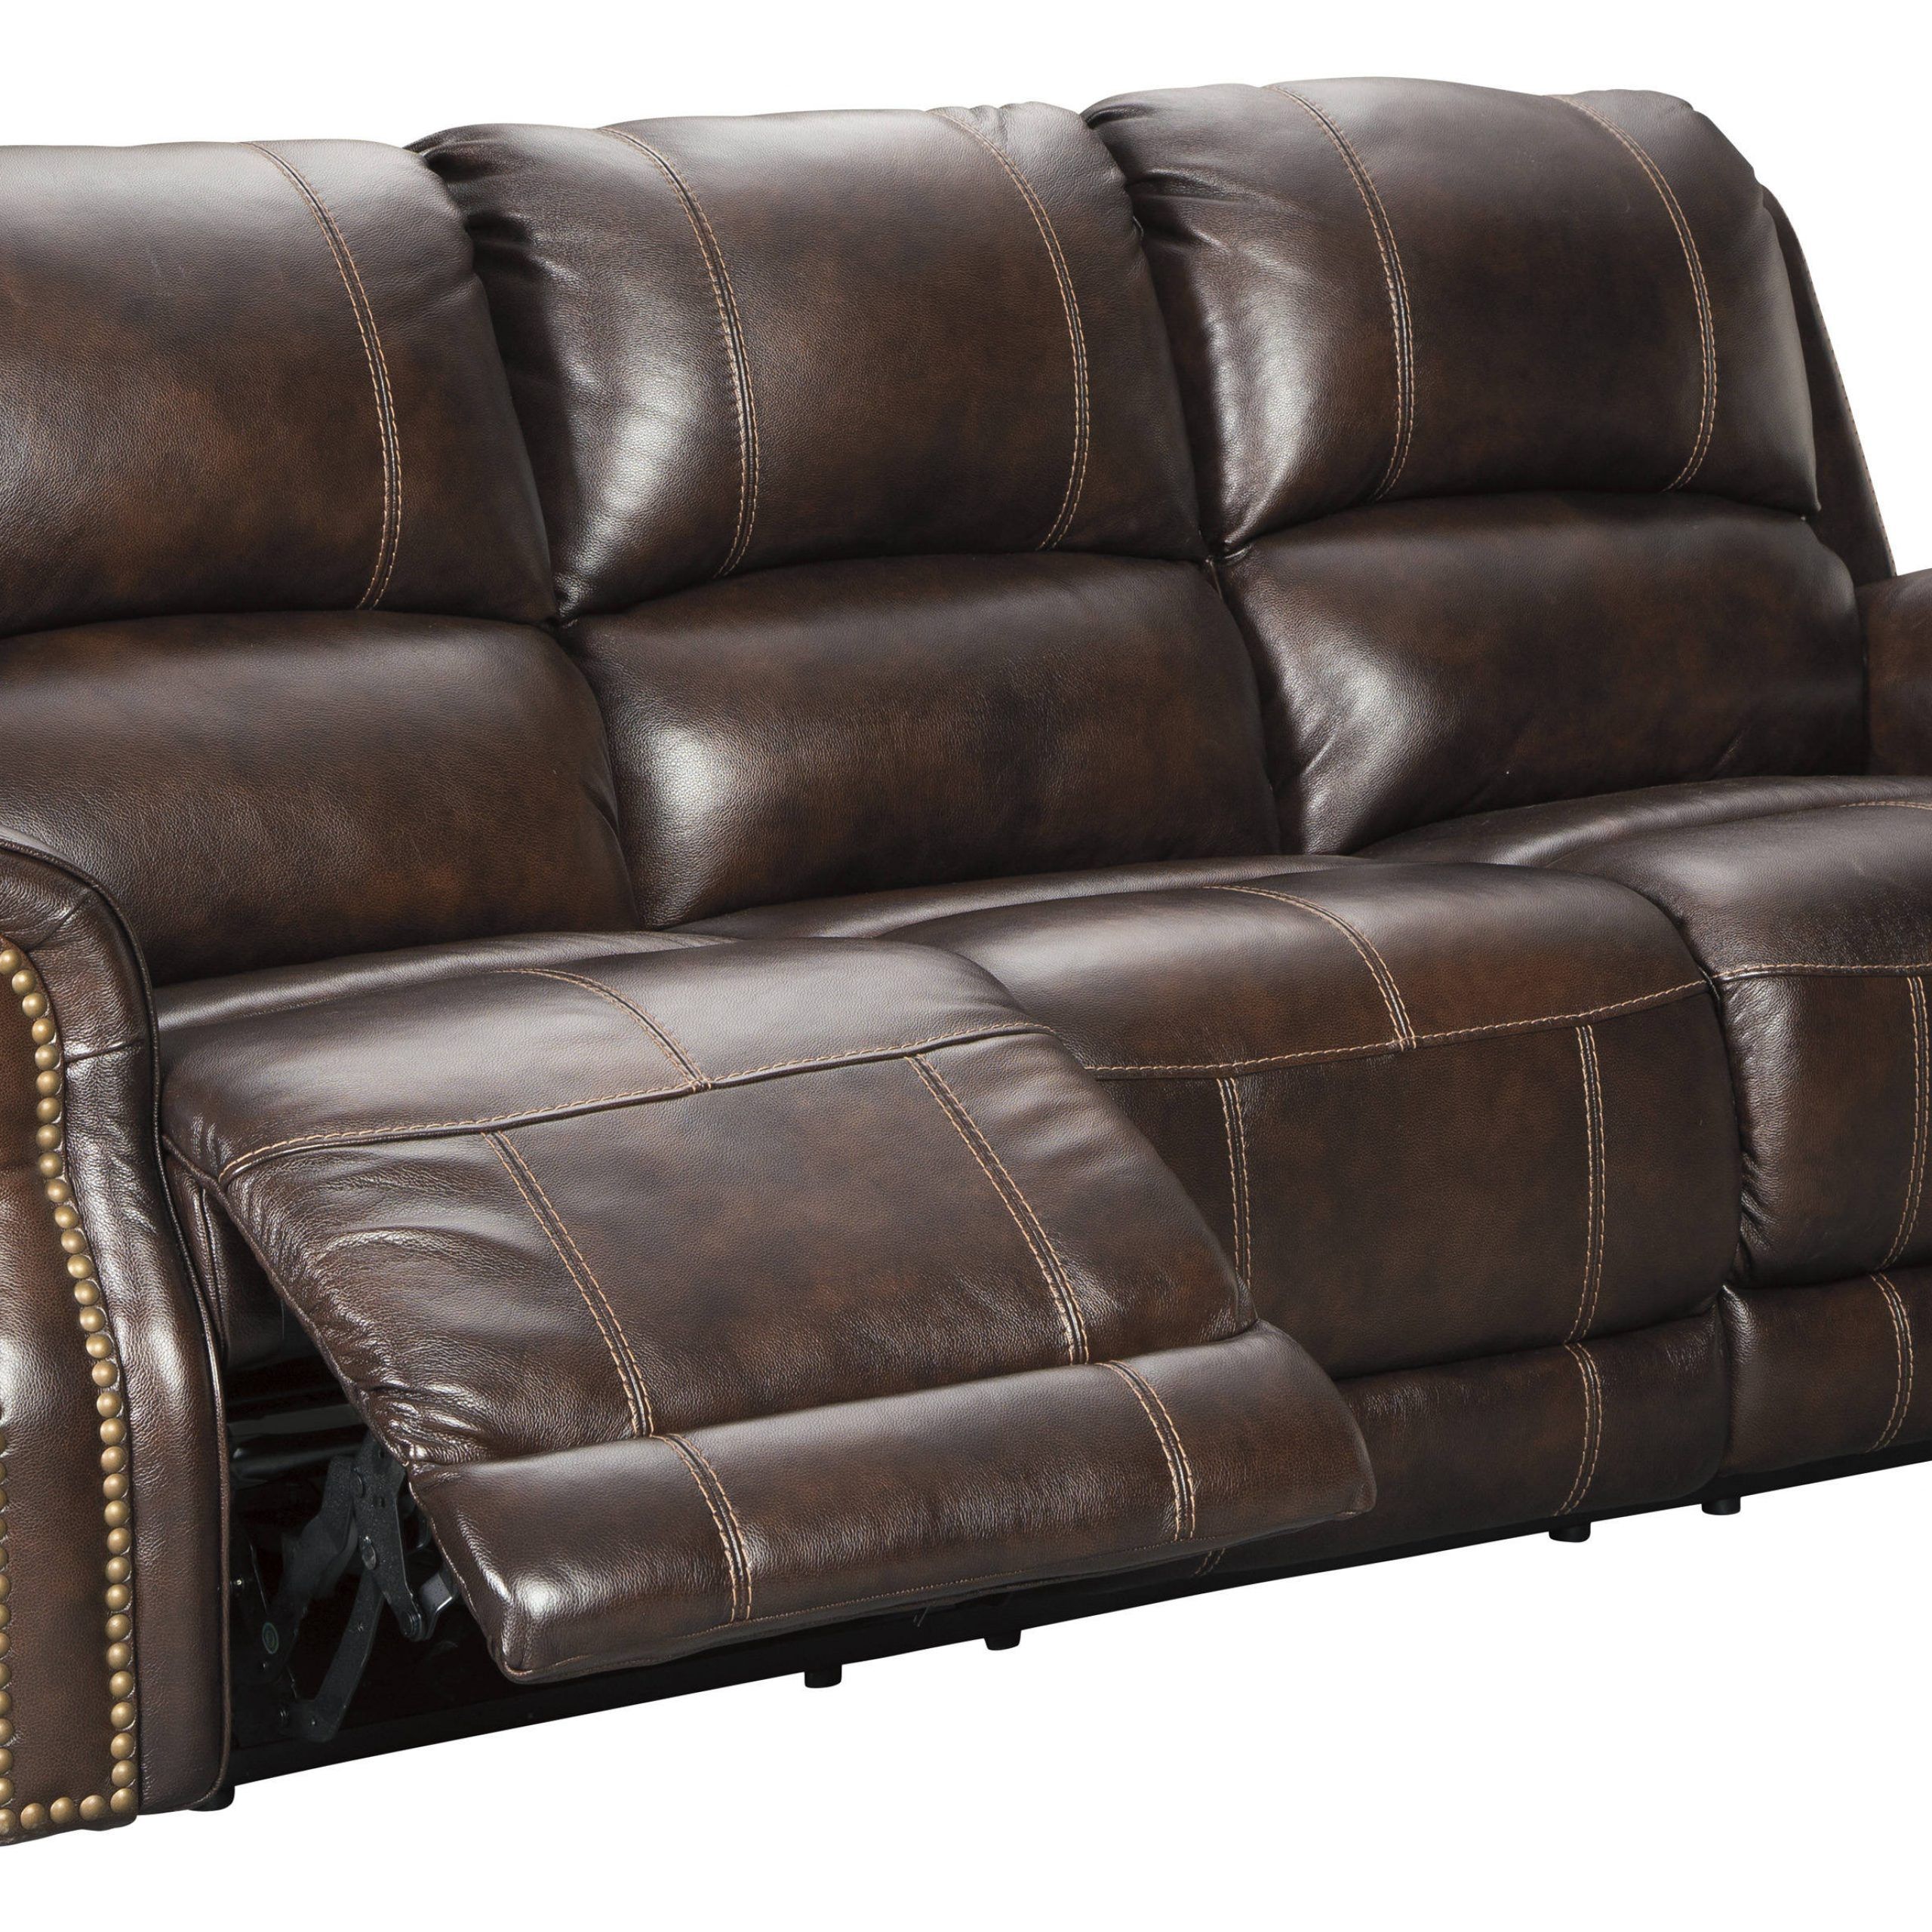 Ashley Furniture Buncrana Power Reclining Sofa With Inside Raven Power Reclining Sofas (View 3 of 15)